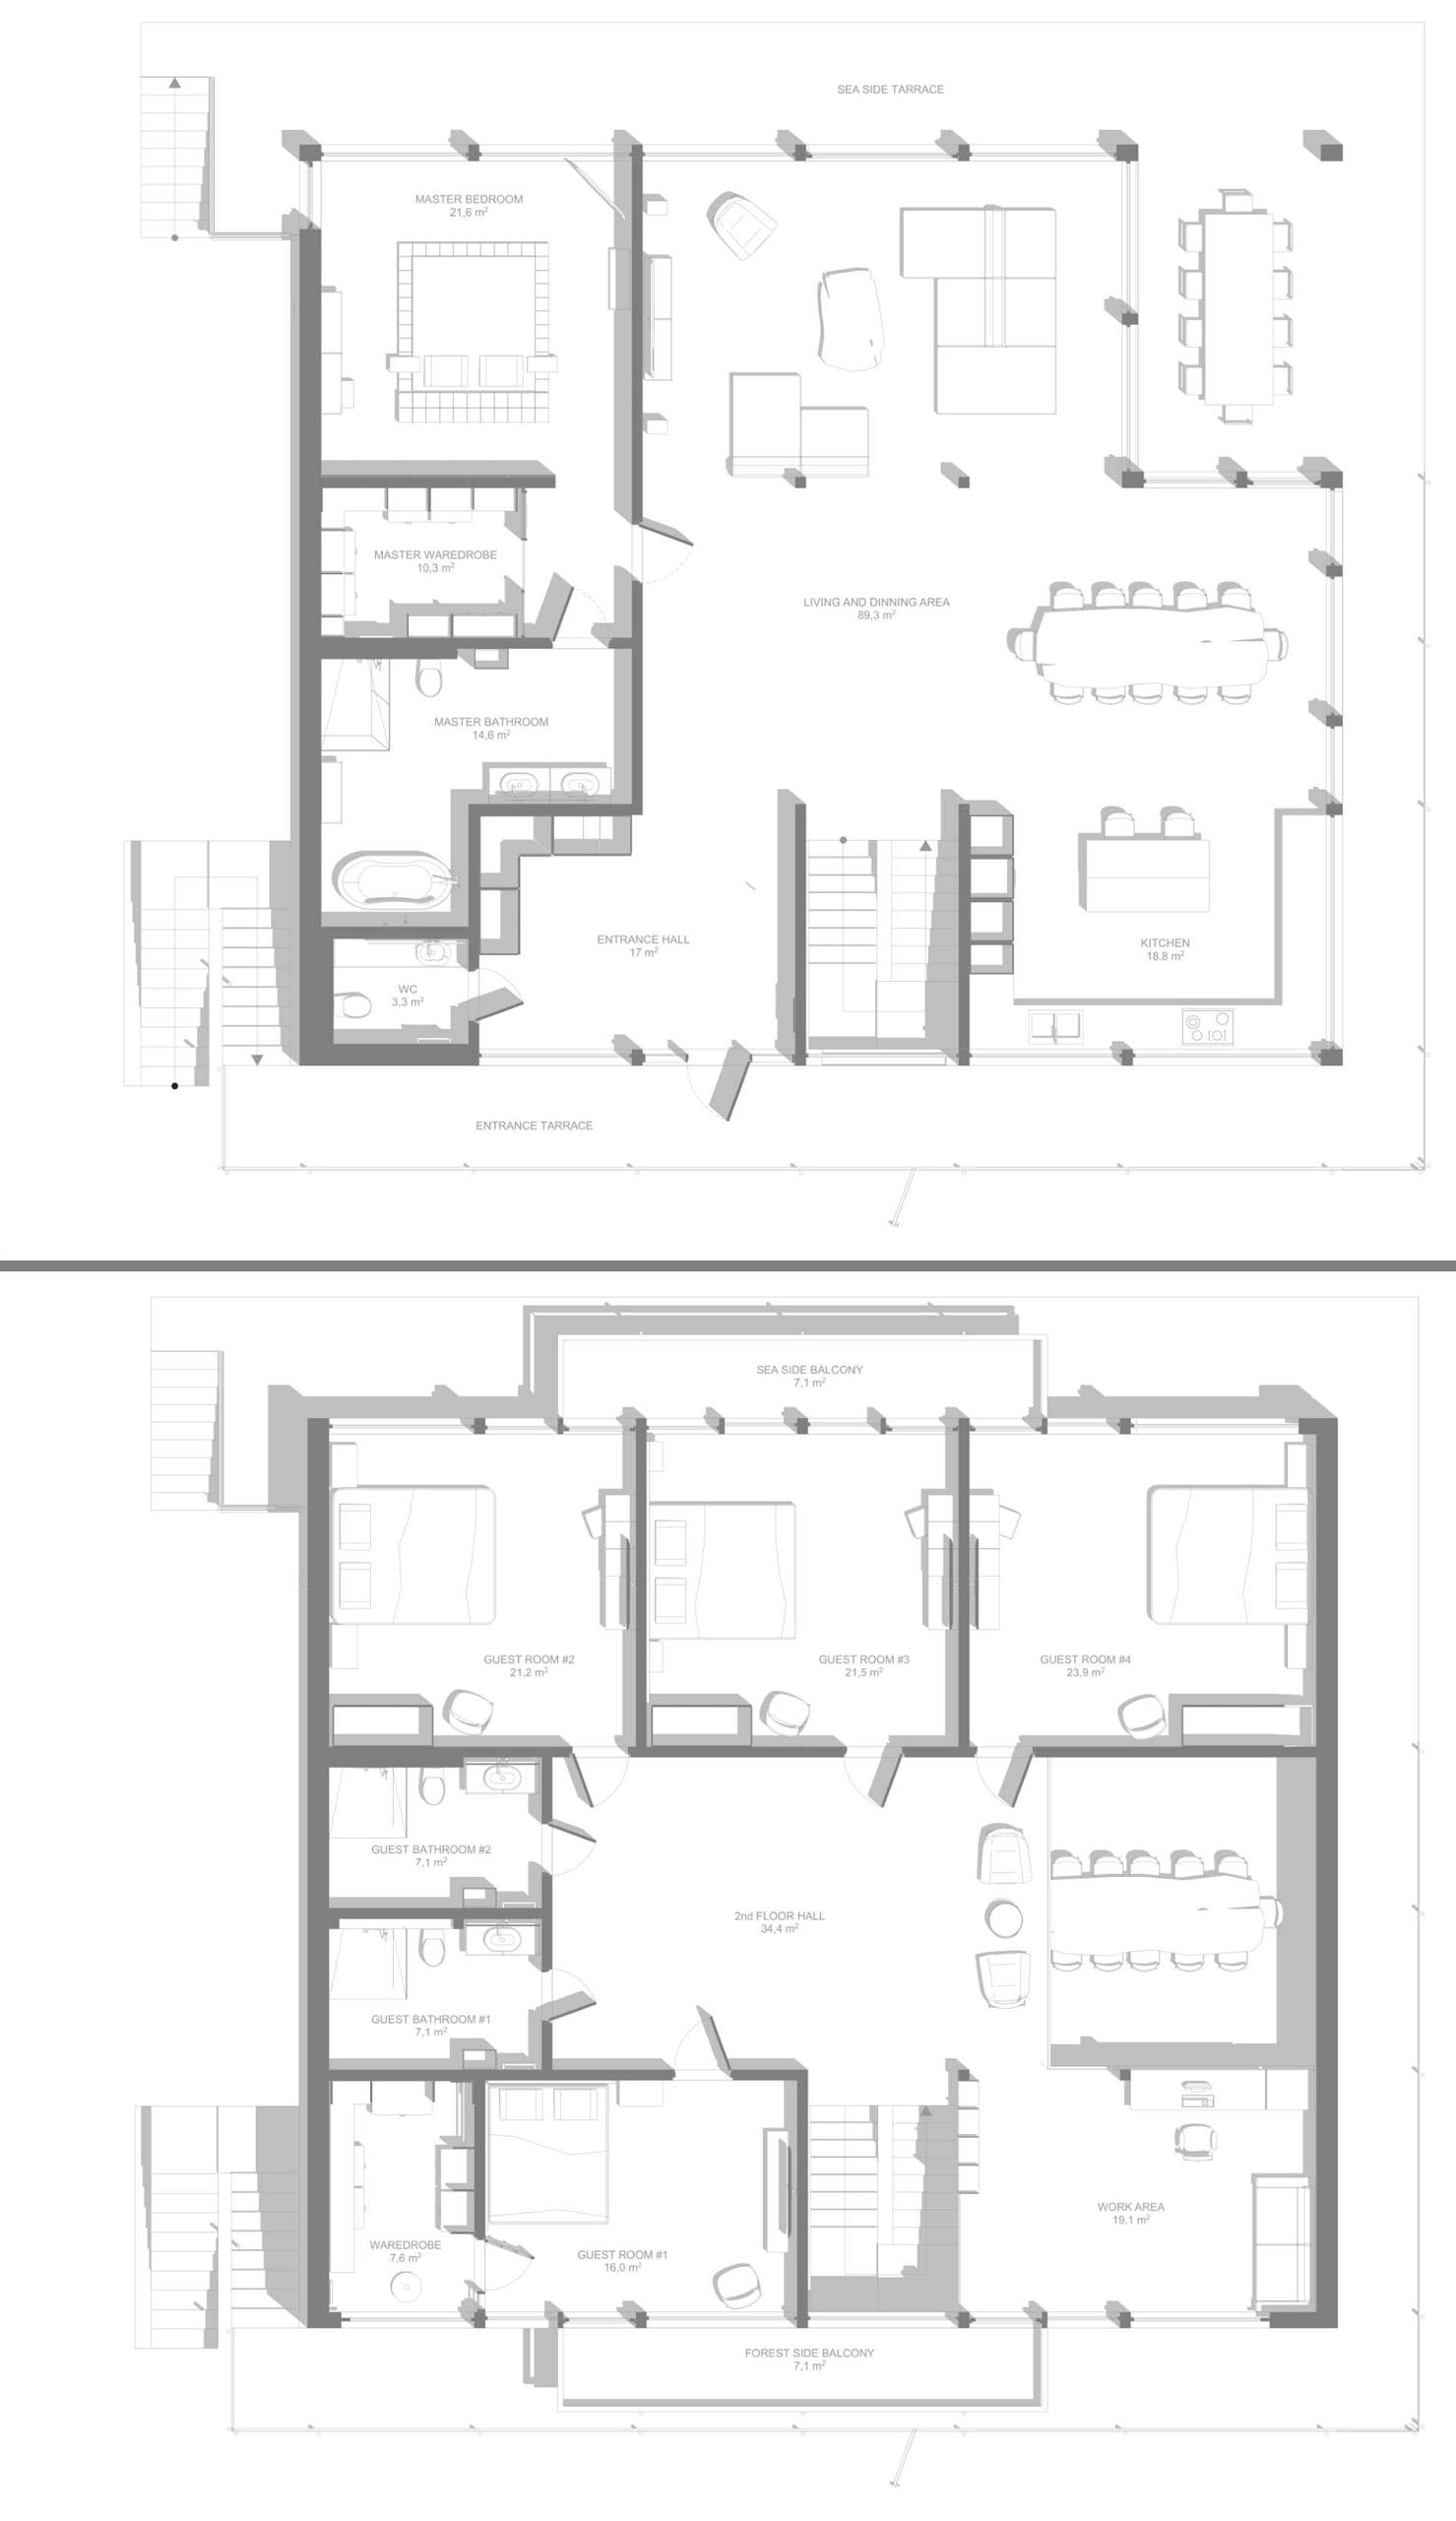 The floor plan of a two storey modern home.